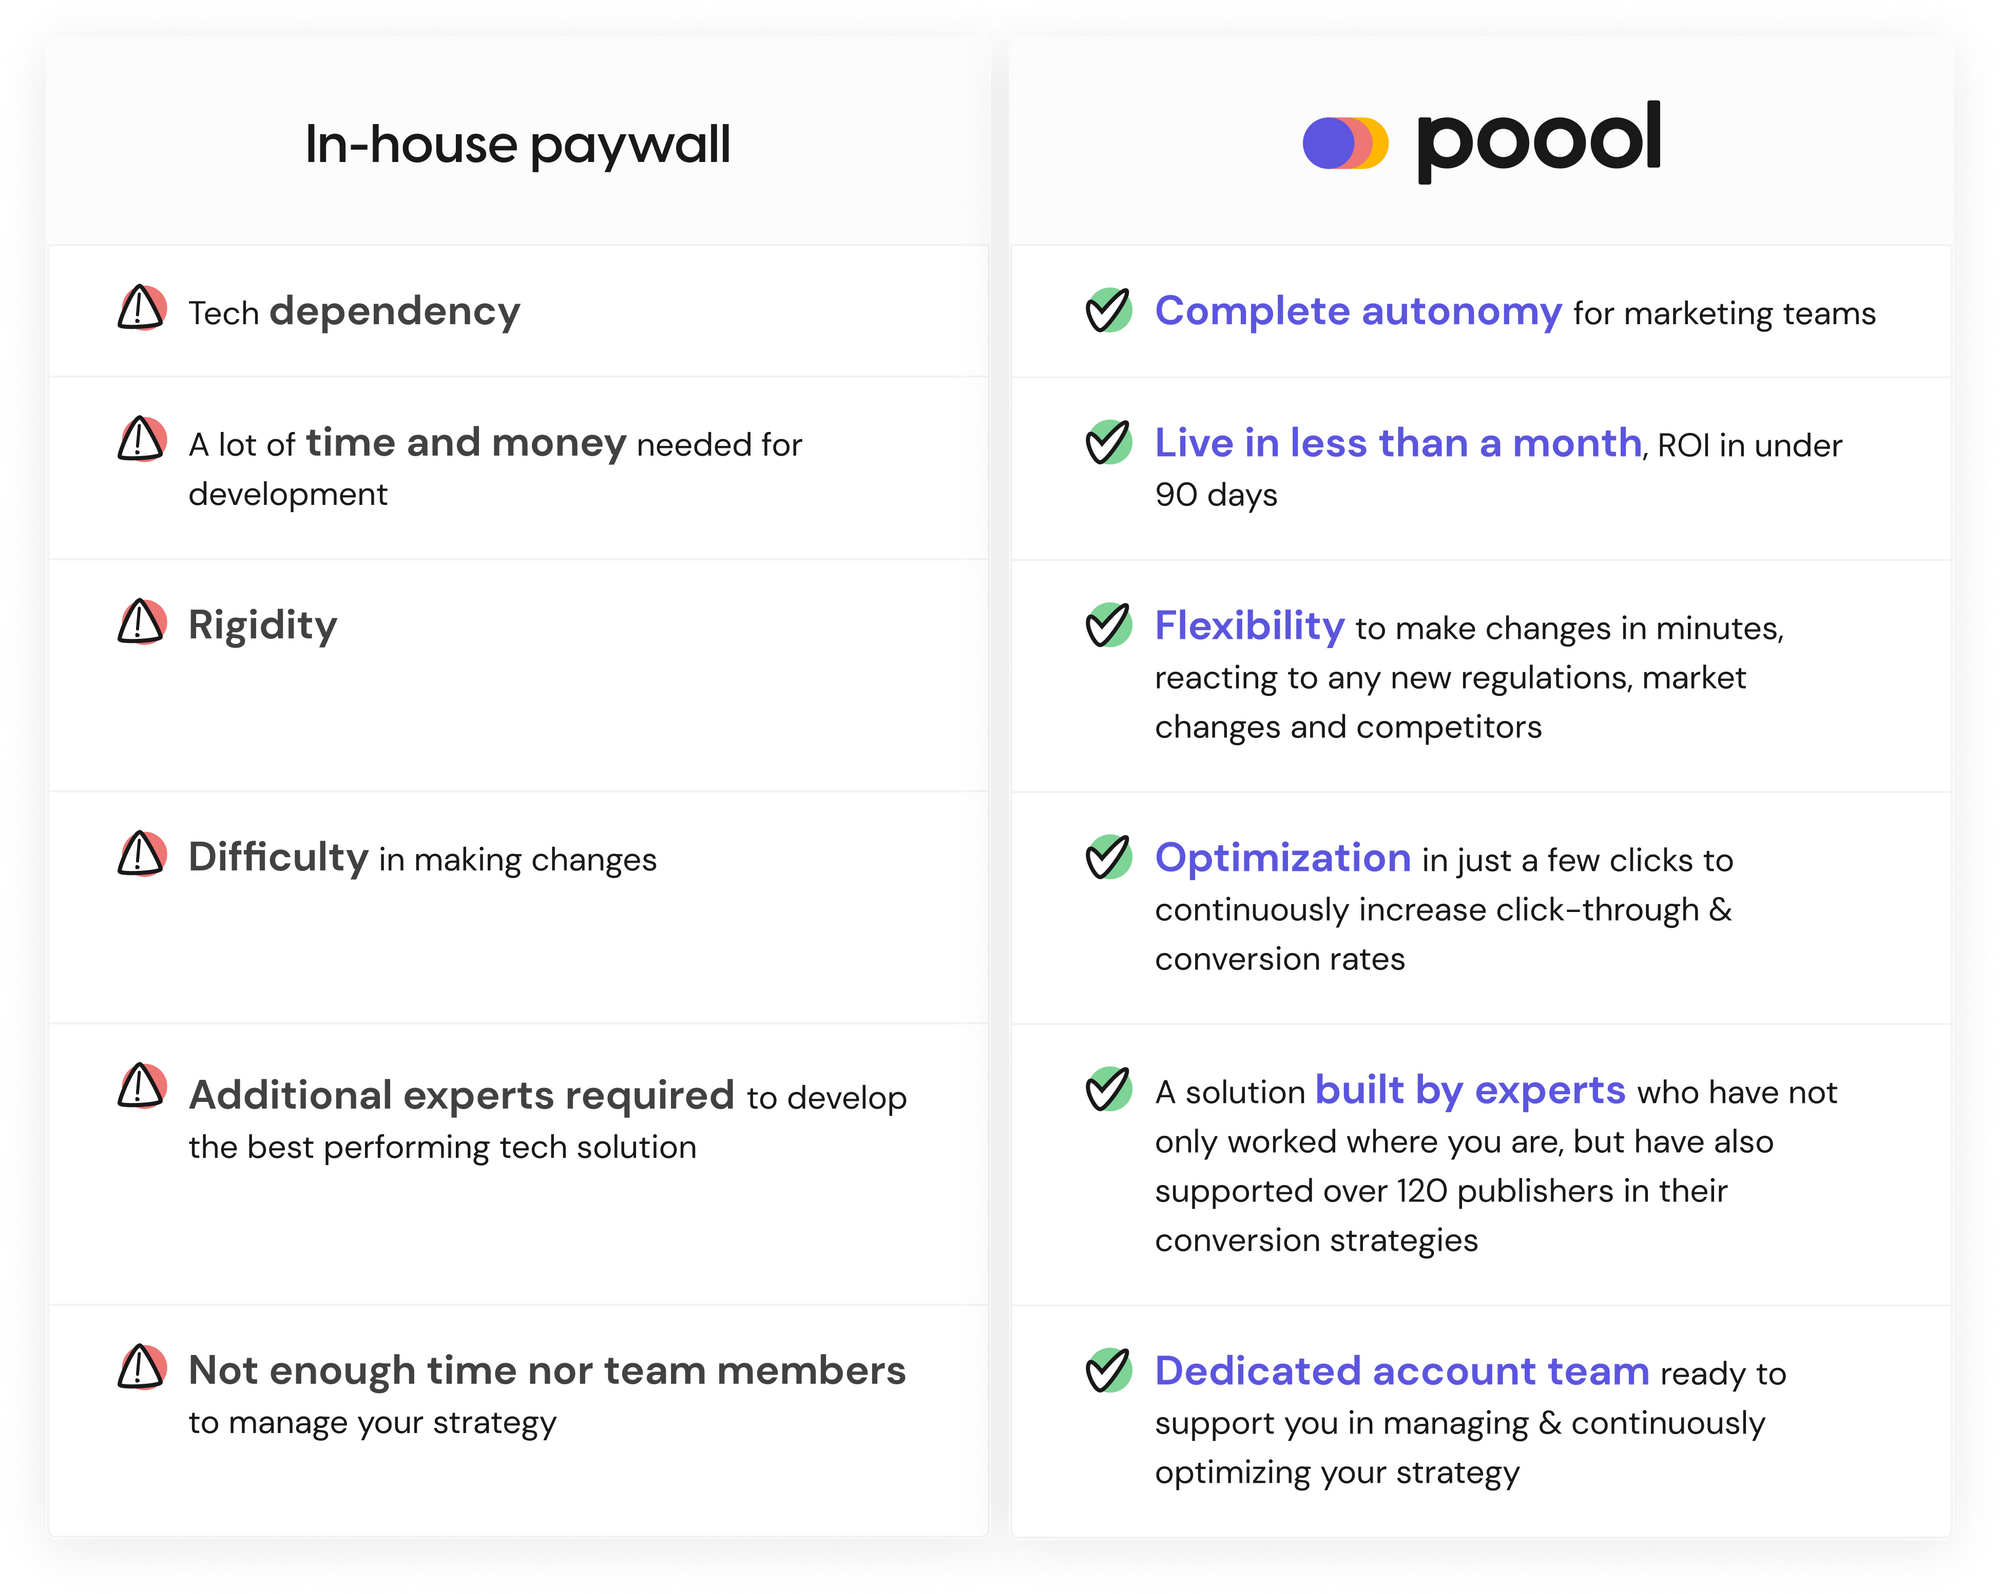 Poool vs in-house: why choose Poool over an in-house solution?